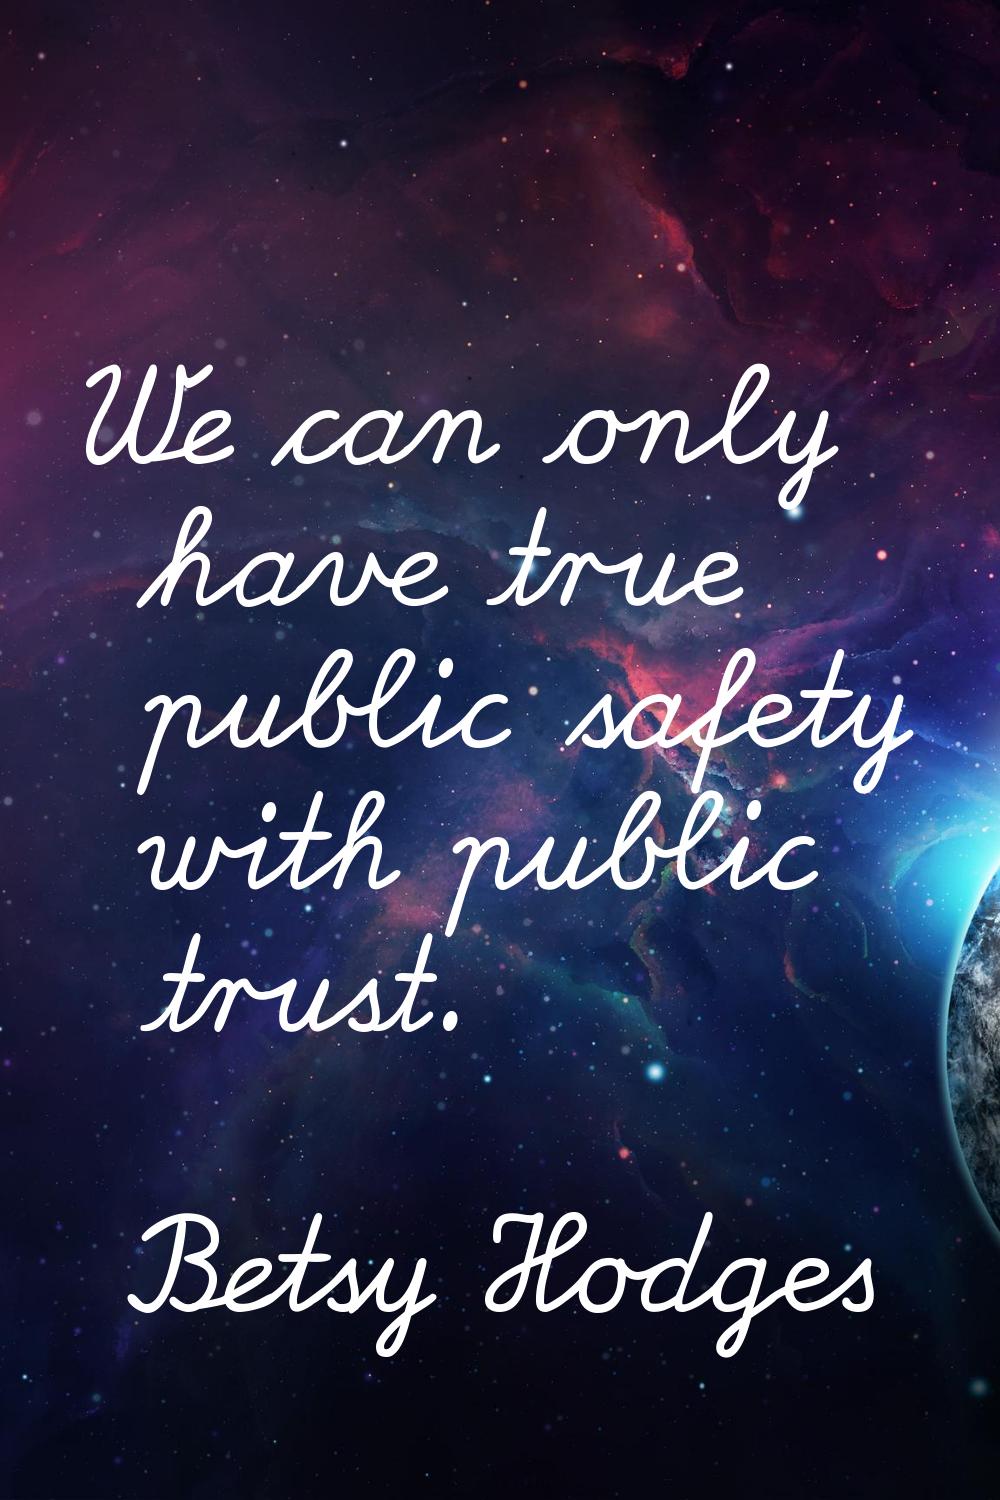 We can only have true public safety with public trust.